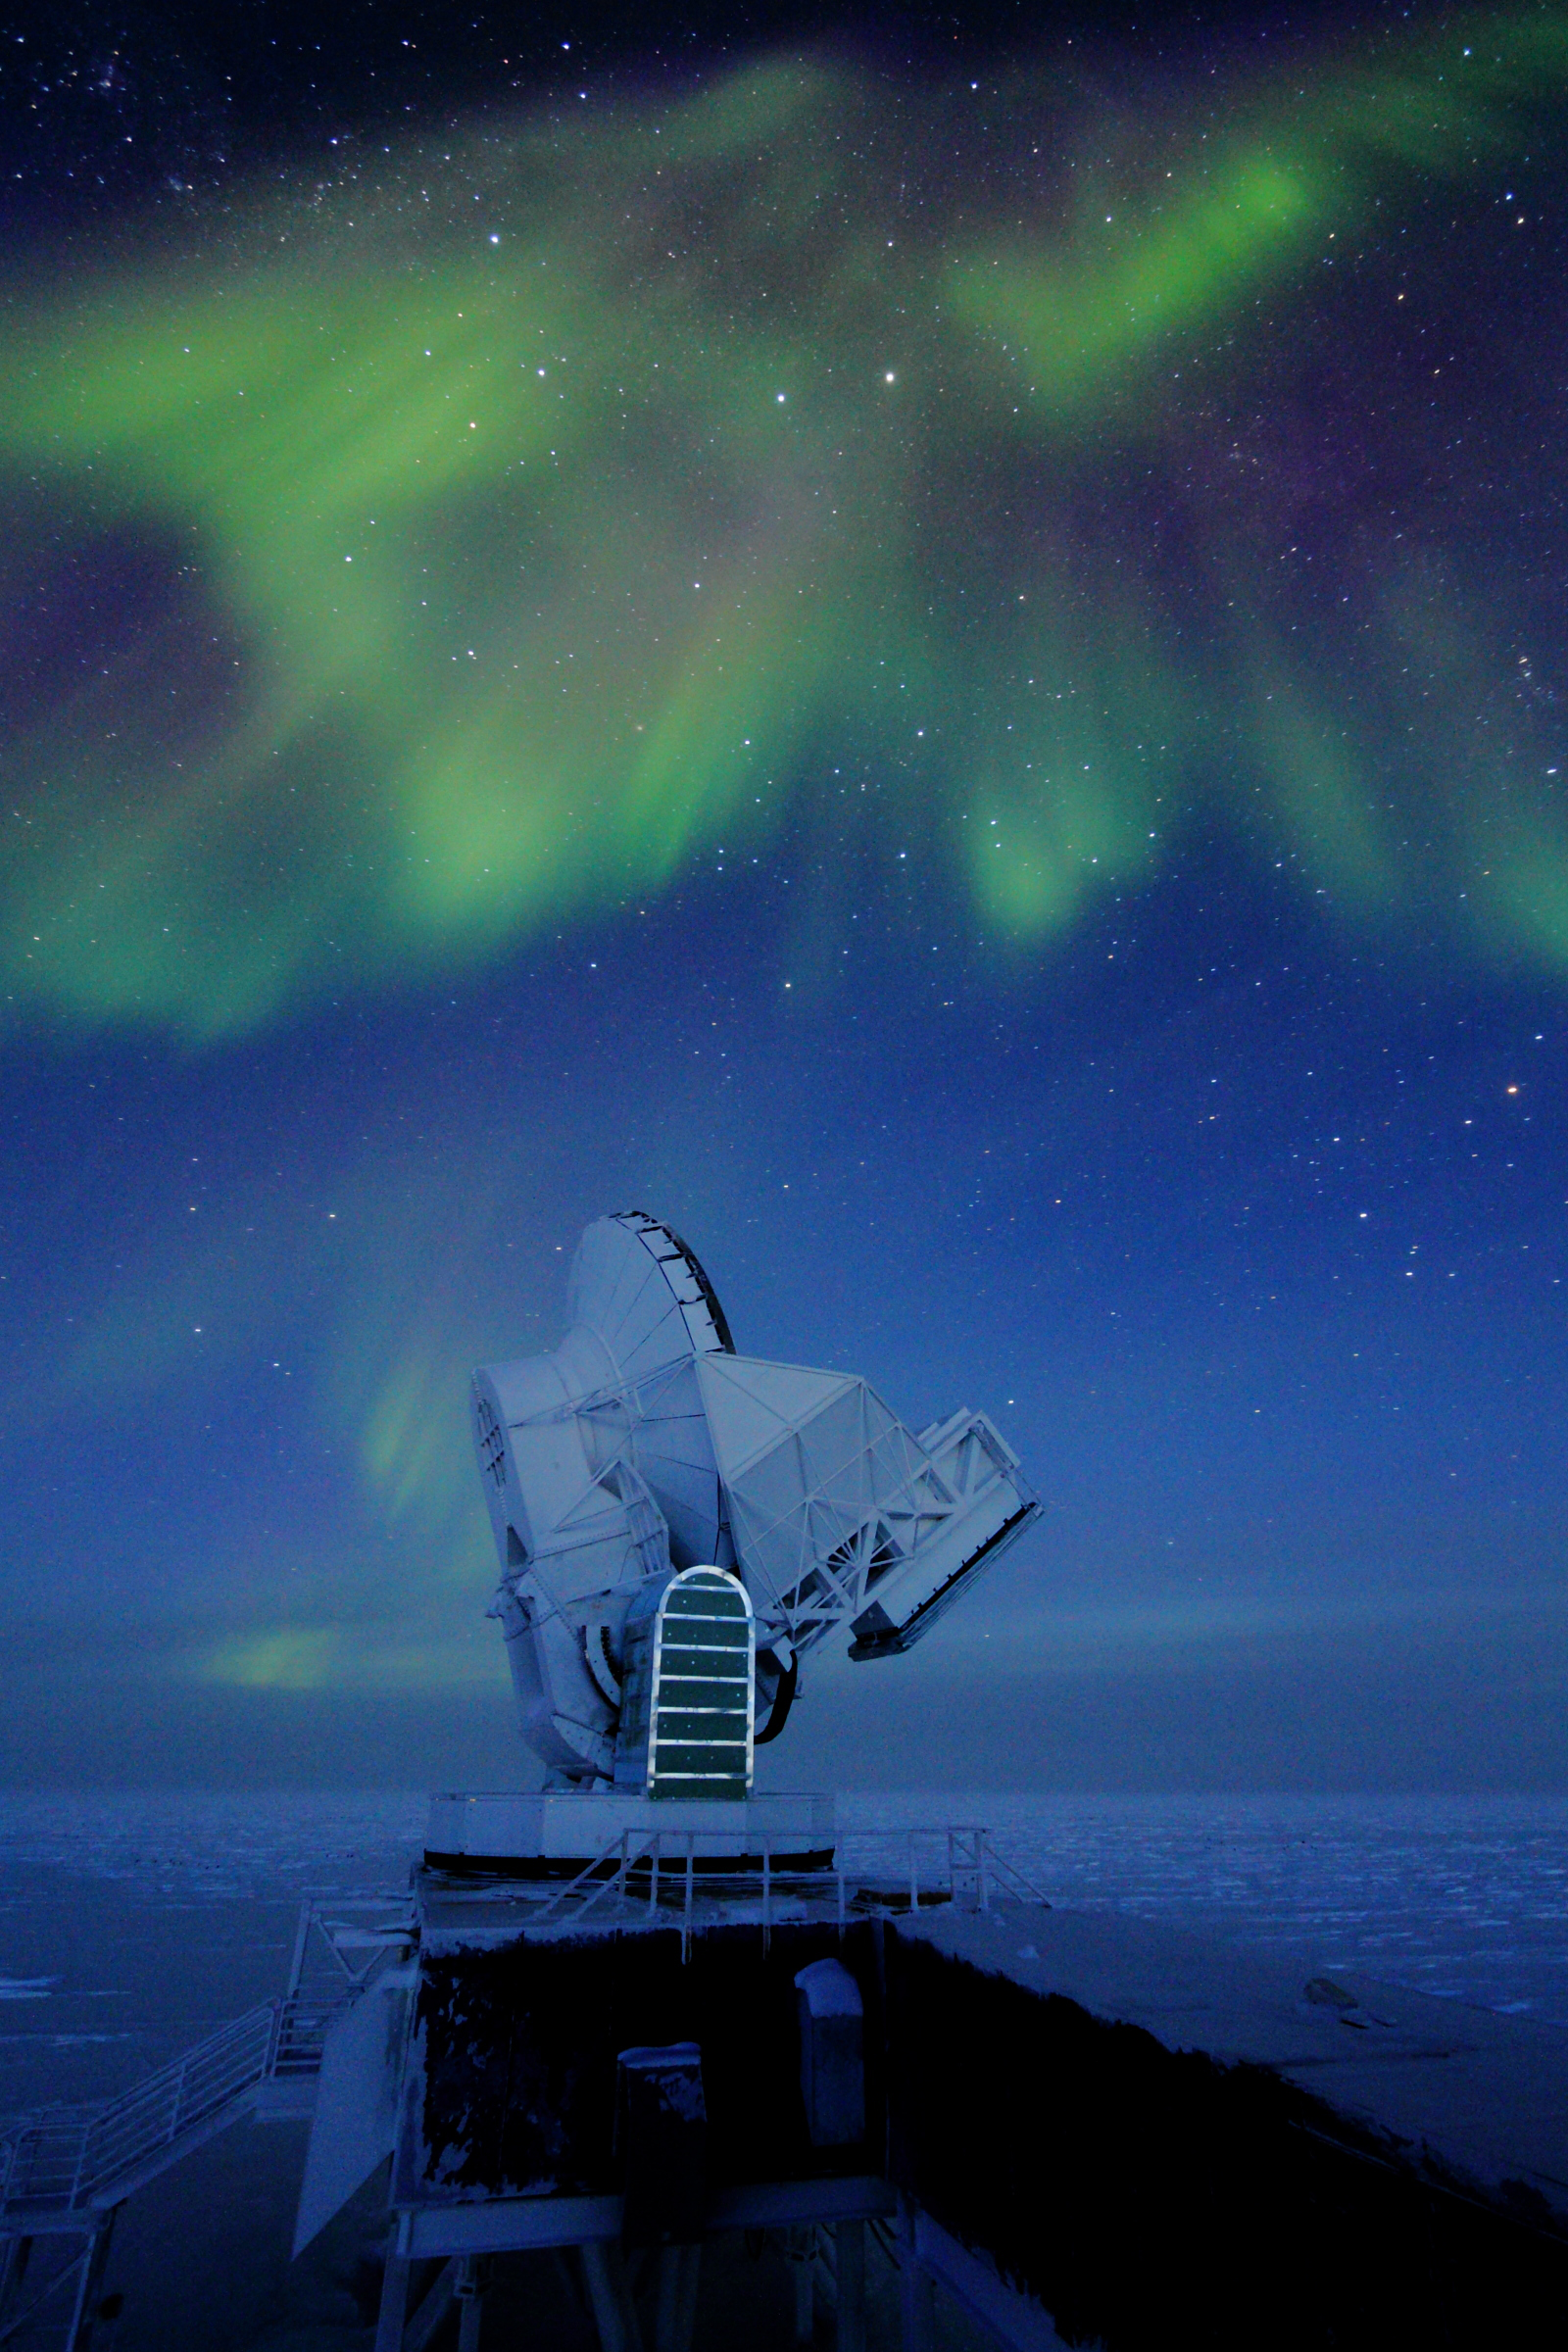 Auroras above a large telescope at a U.S. research station in Antarctica.